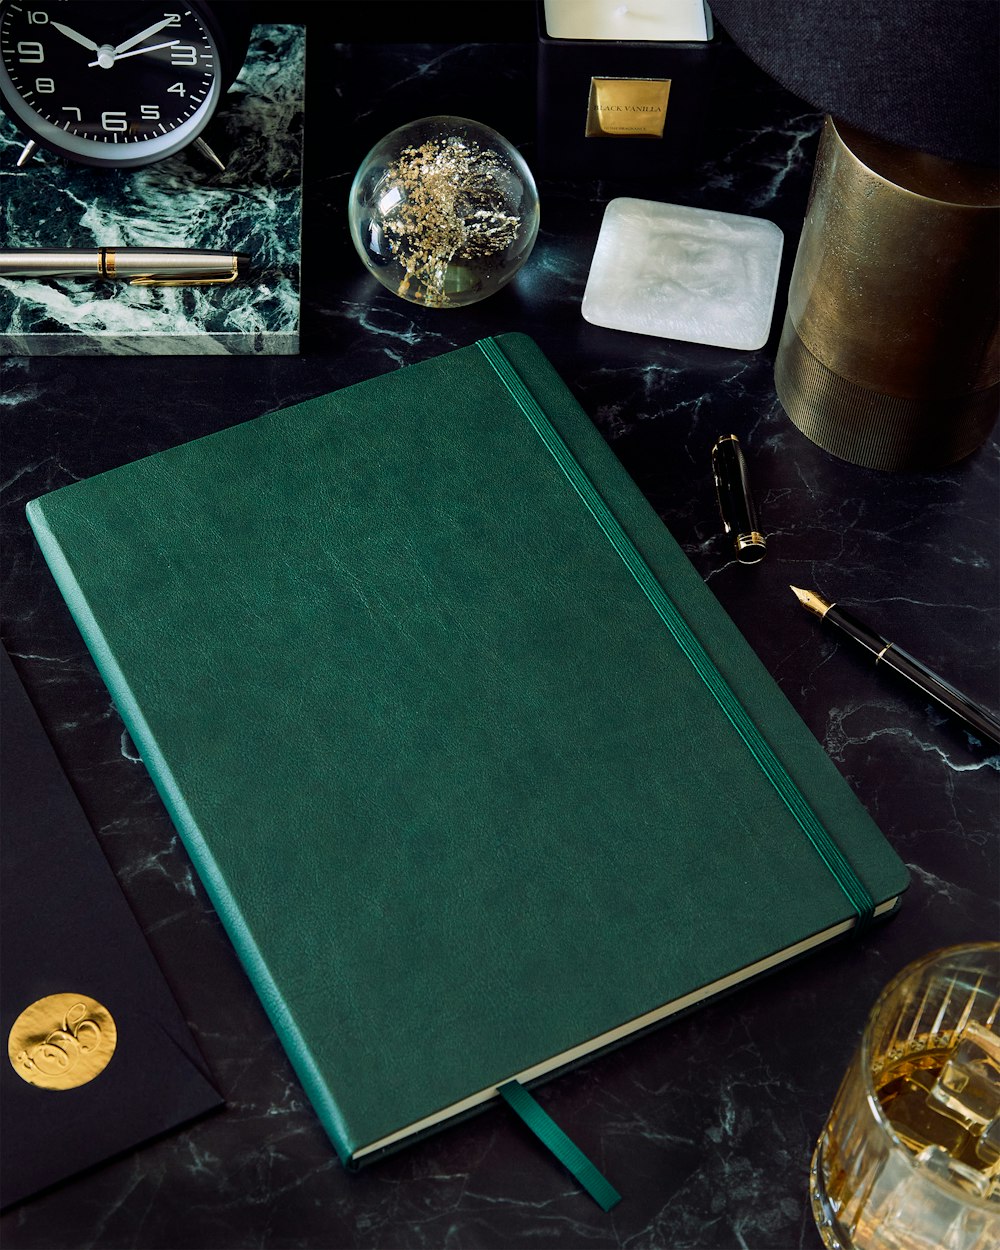 green book on black table